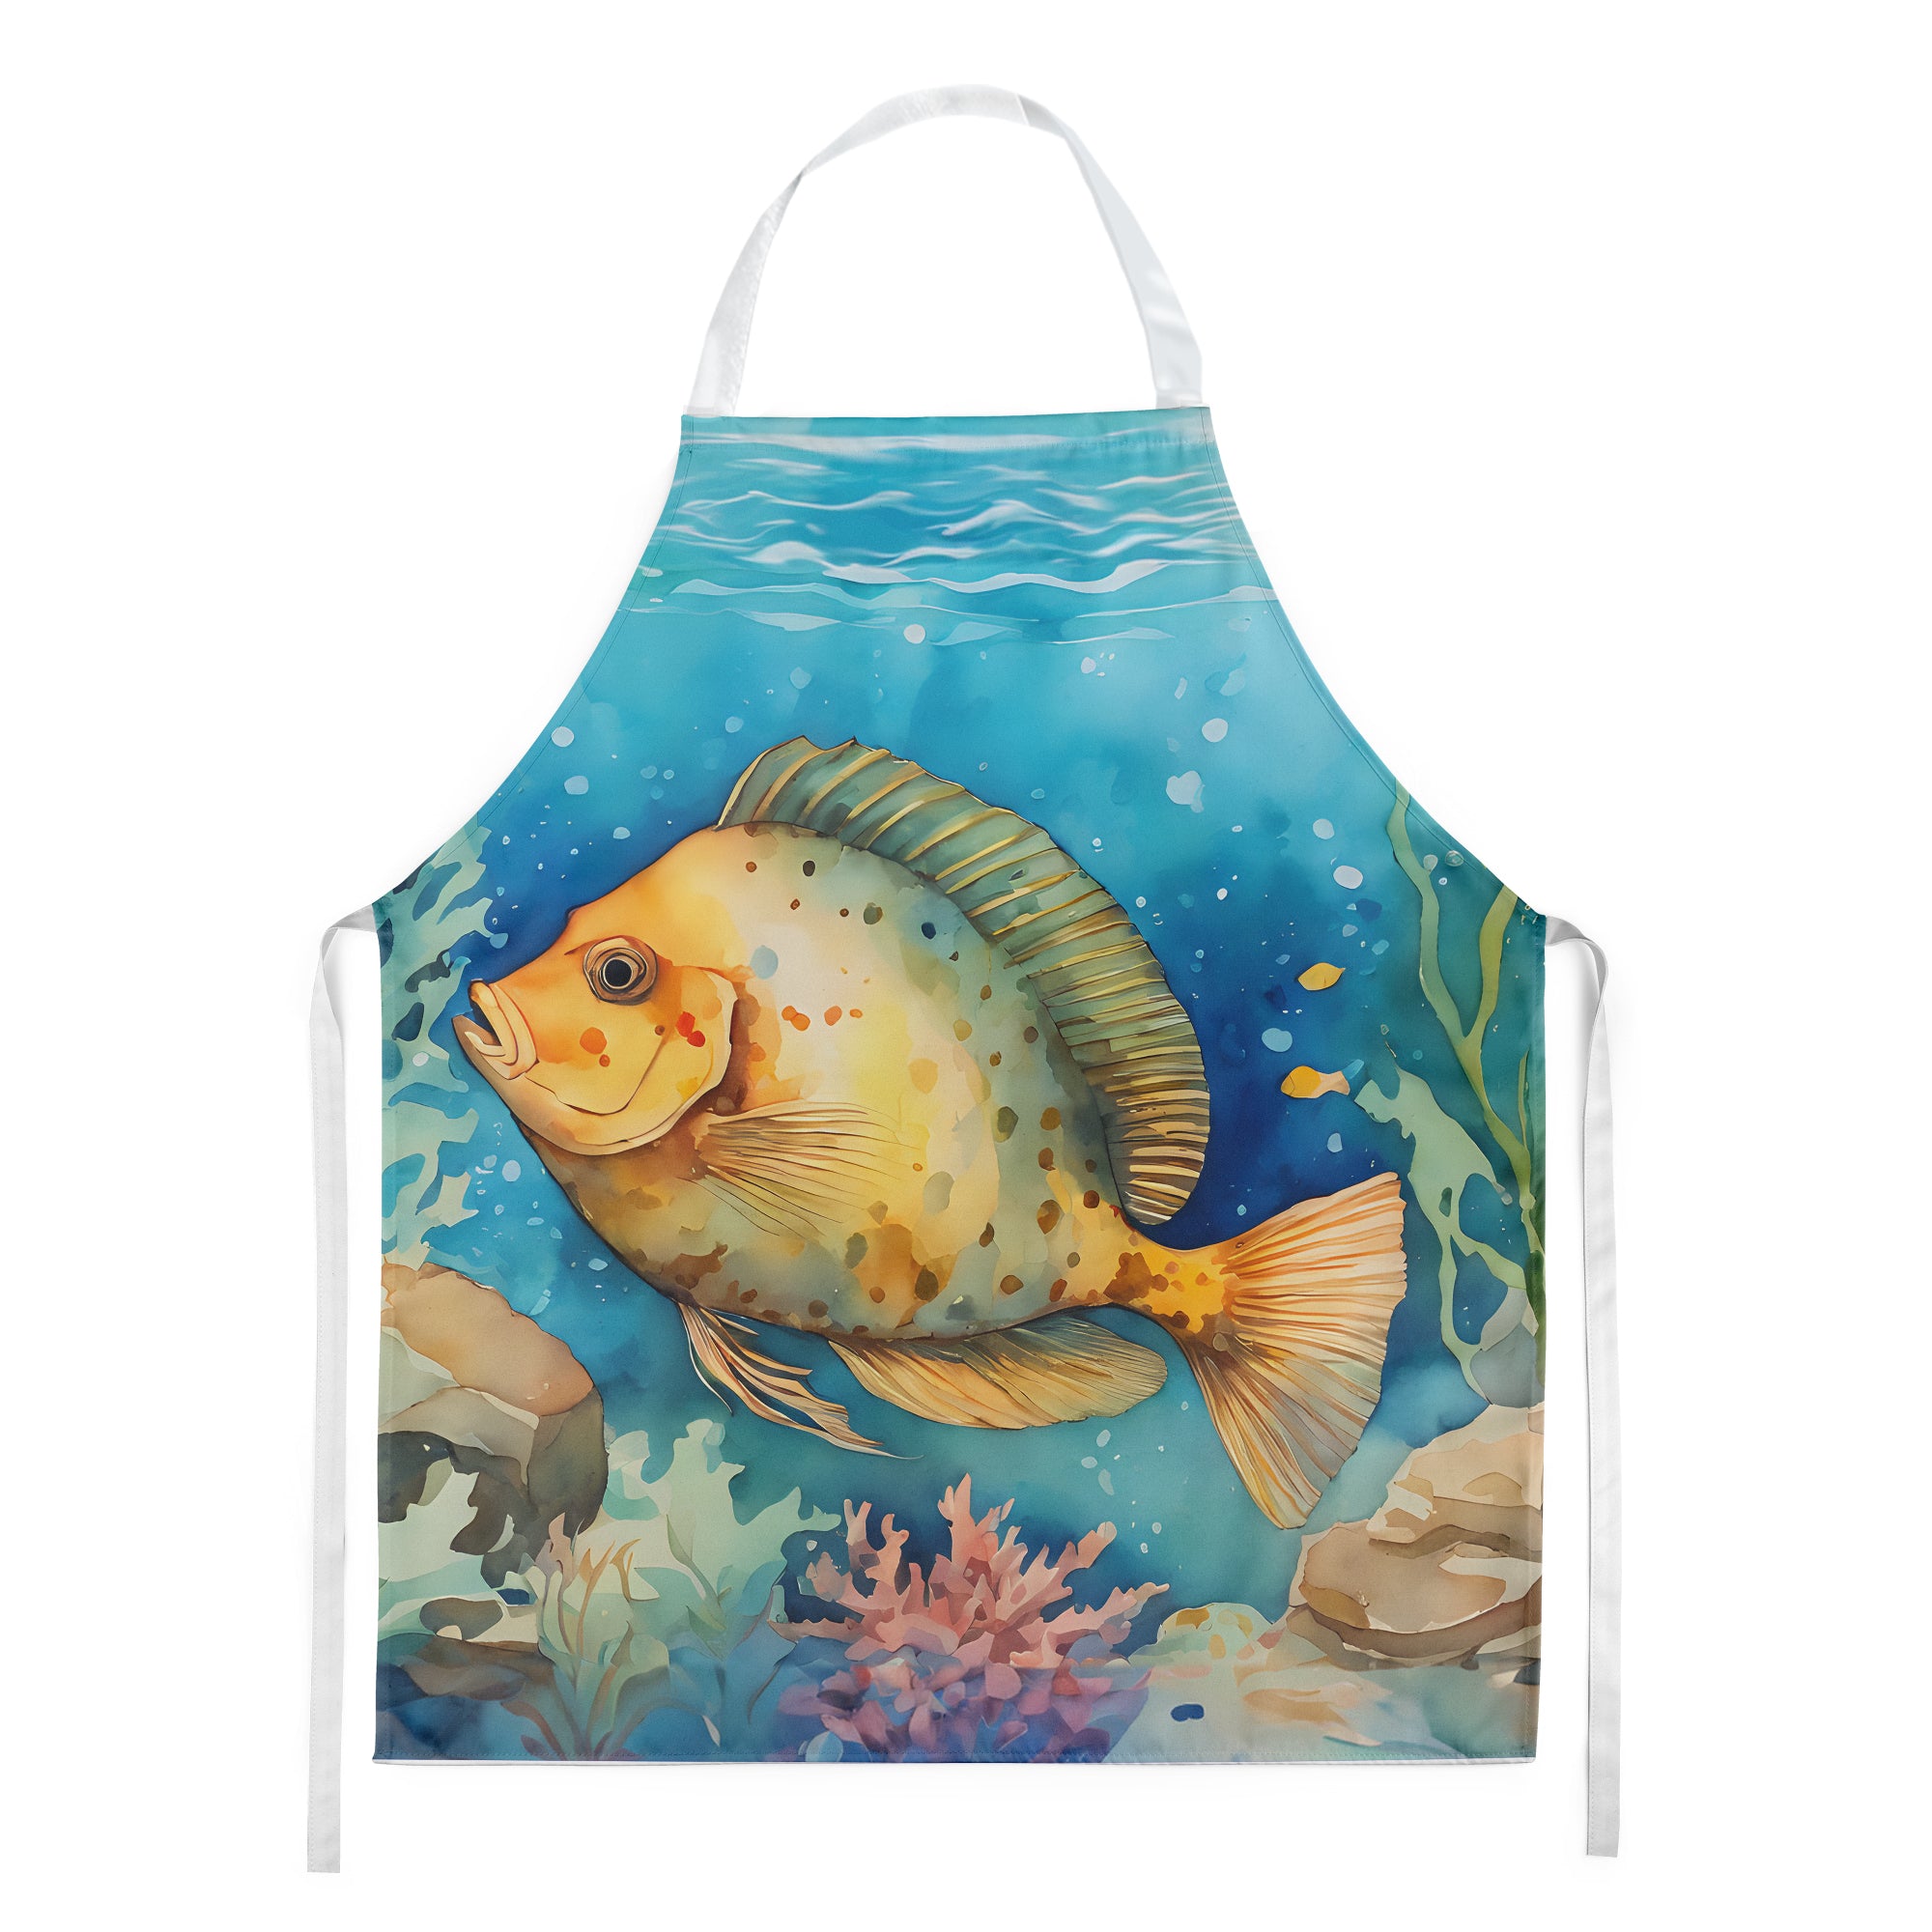 Buy this Flounder Apron